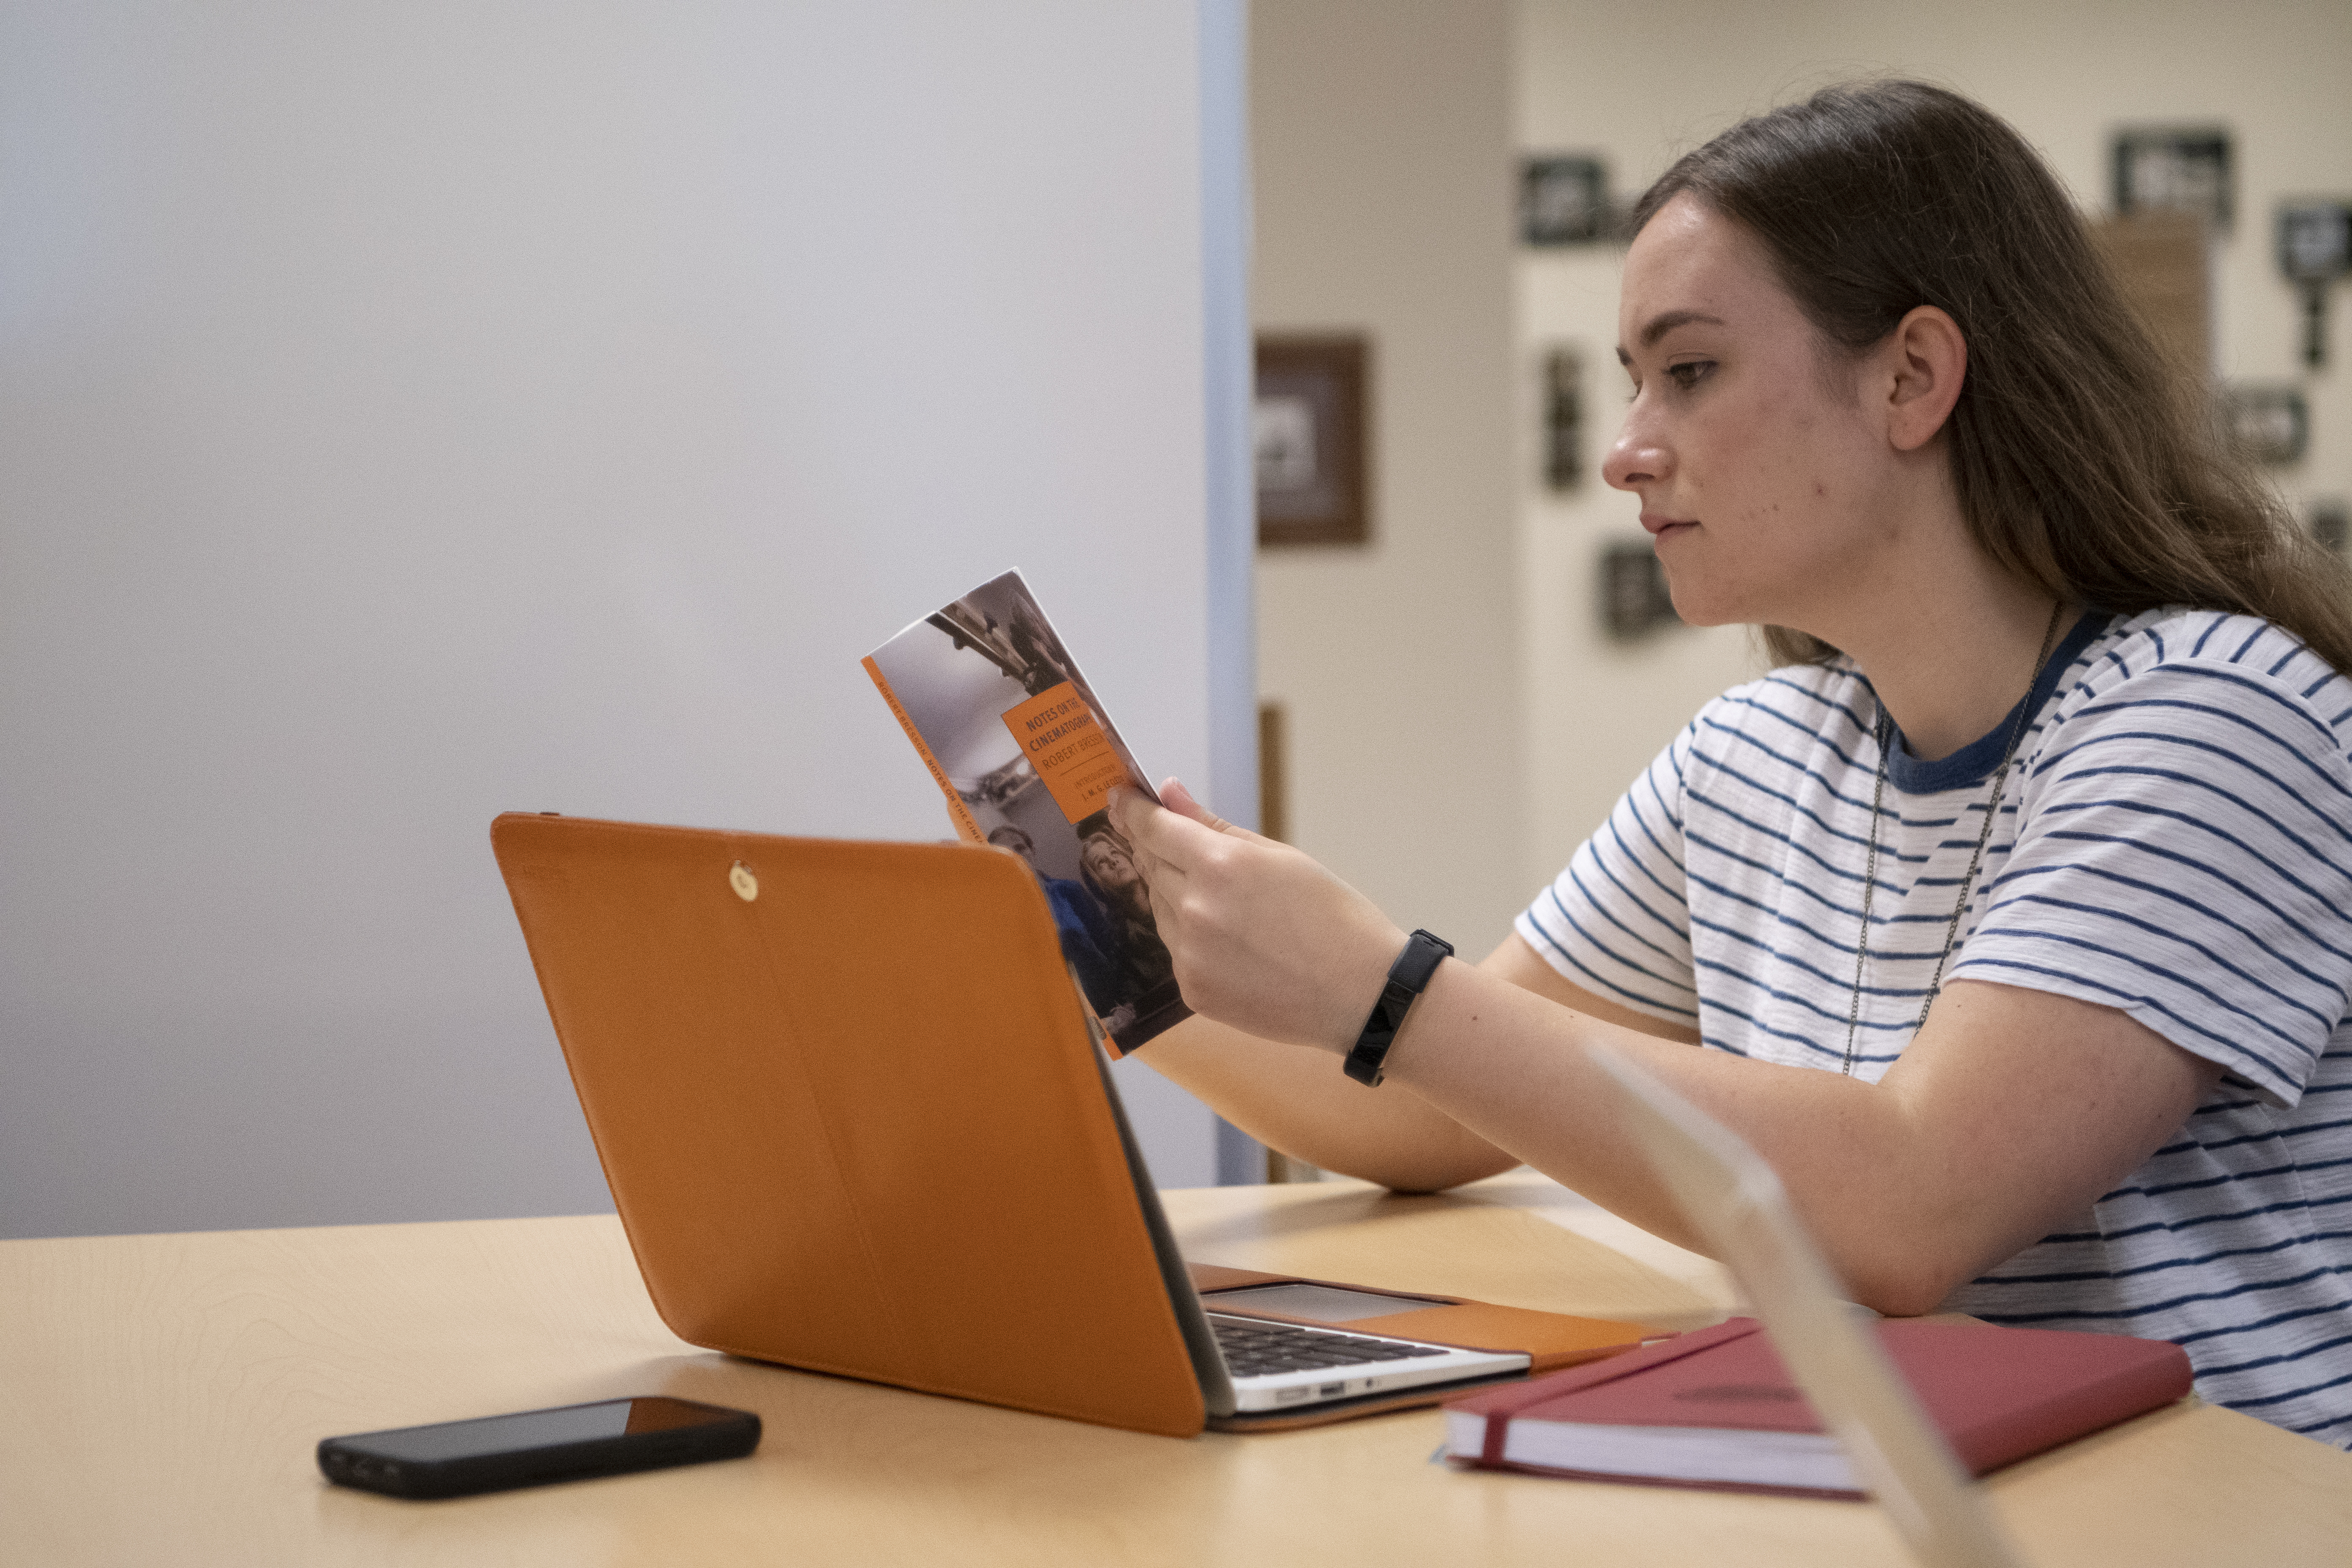 Female student uses computer and book to complete an assignment